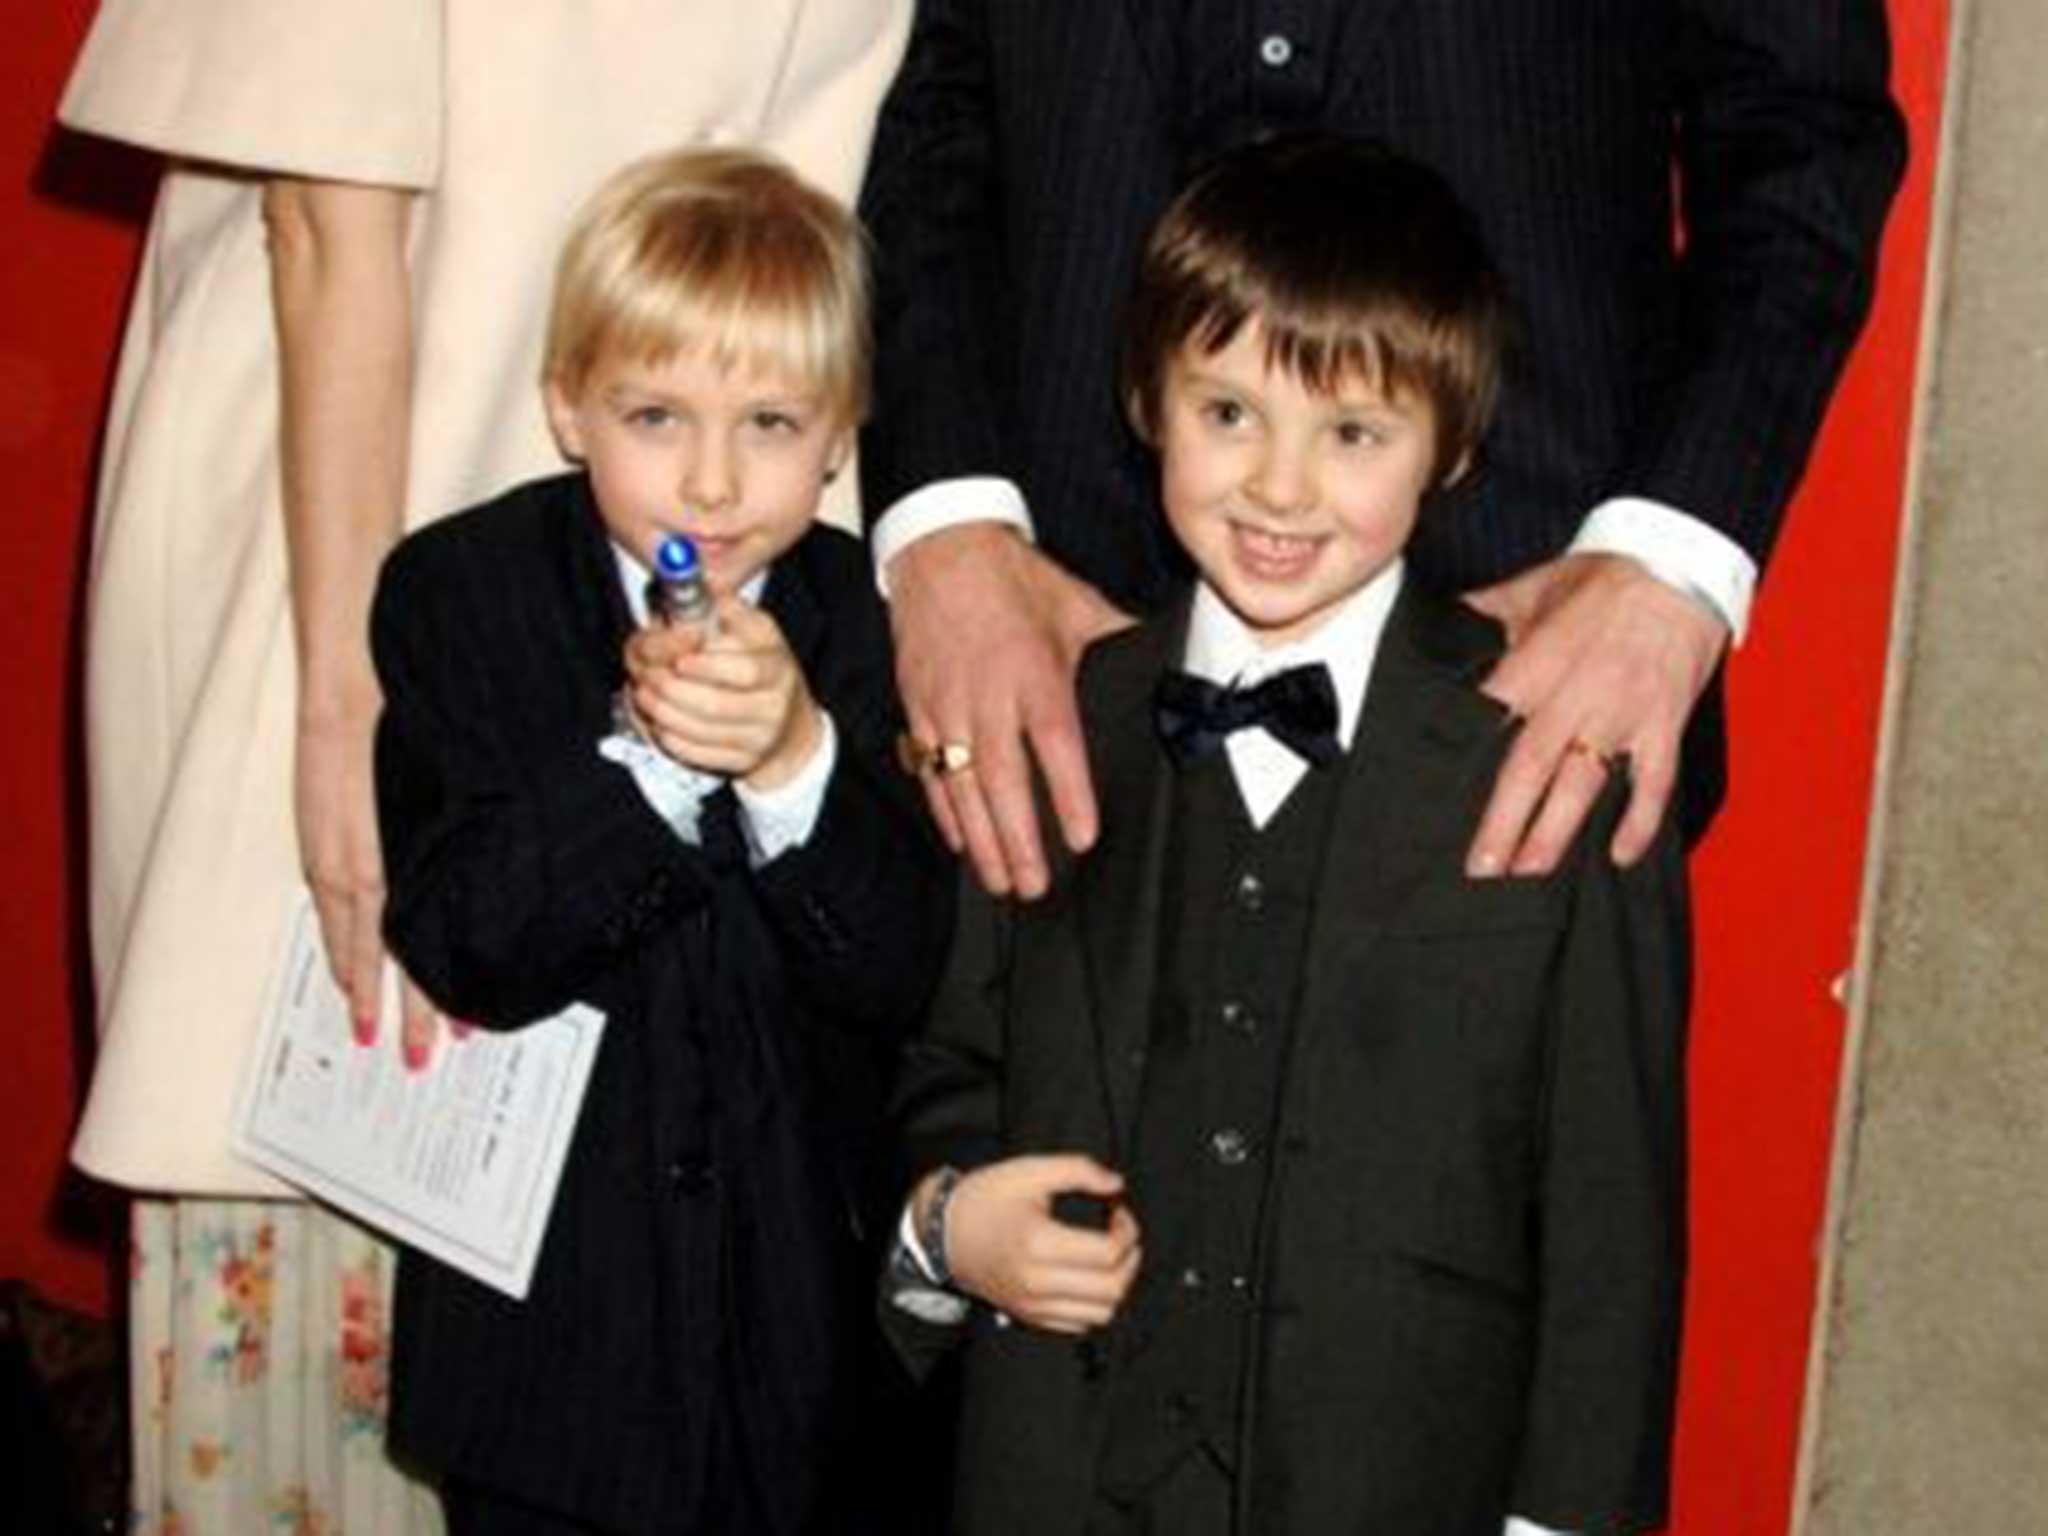 Arthur (left) and Earl (right) attend a press night with their parents in 2007